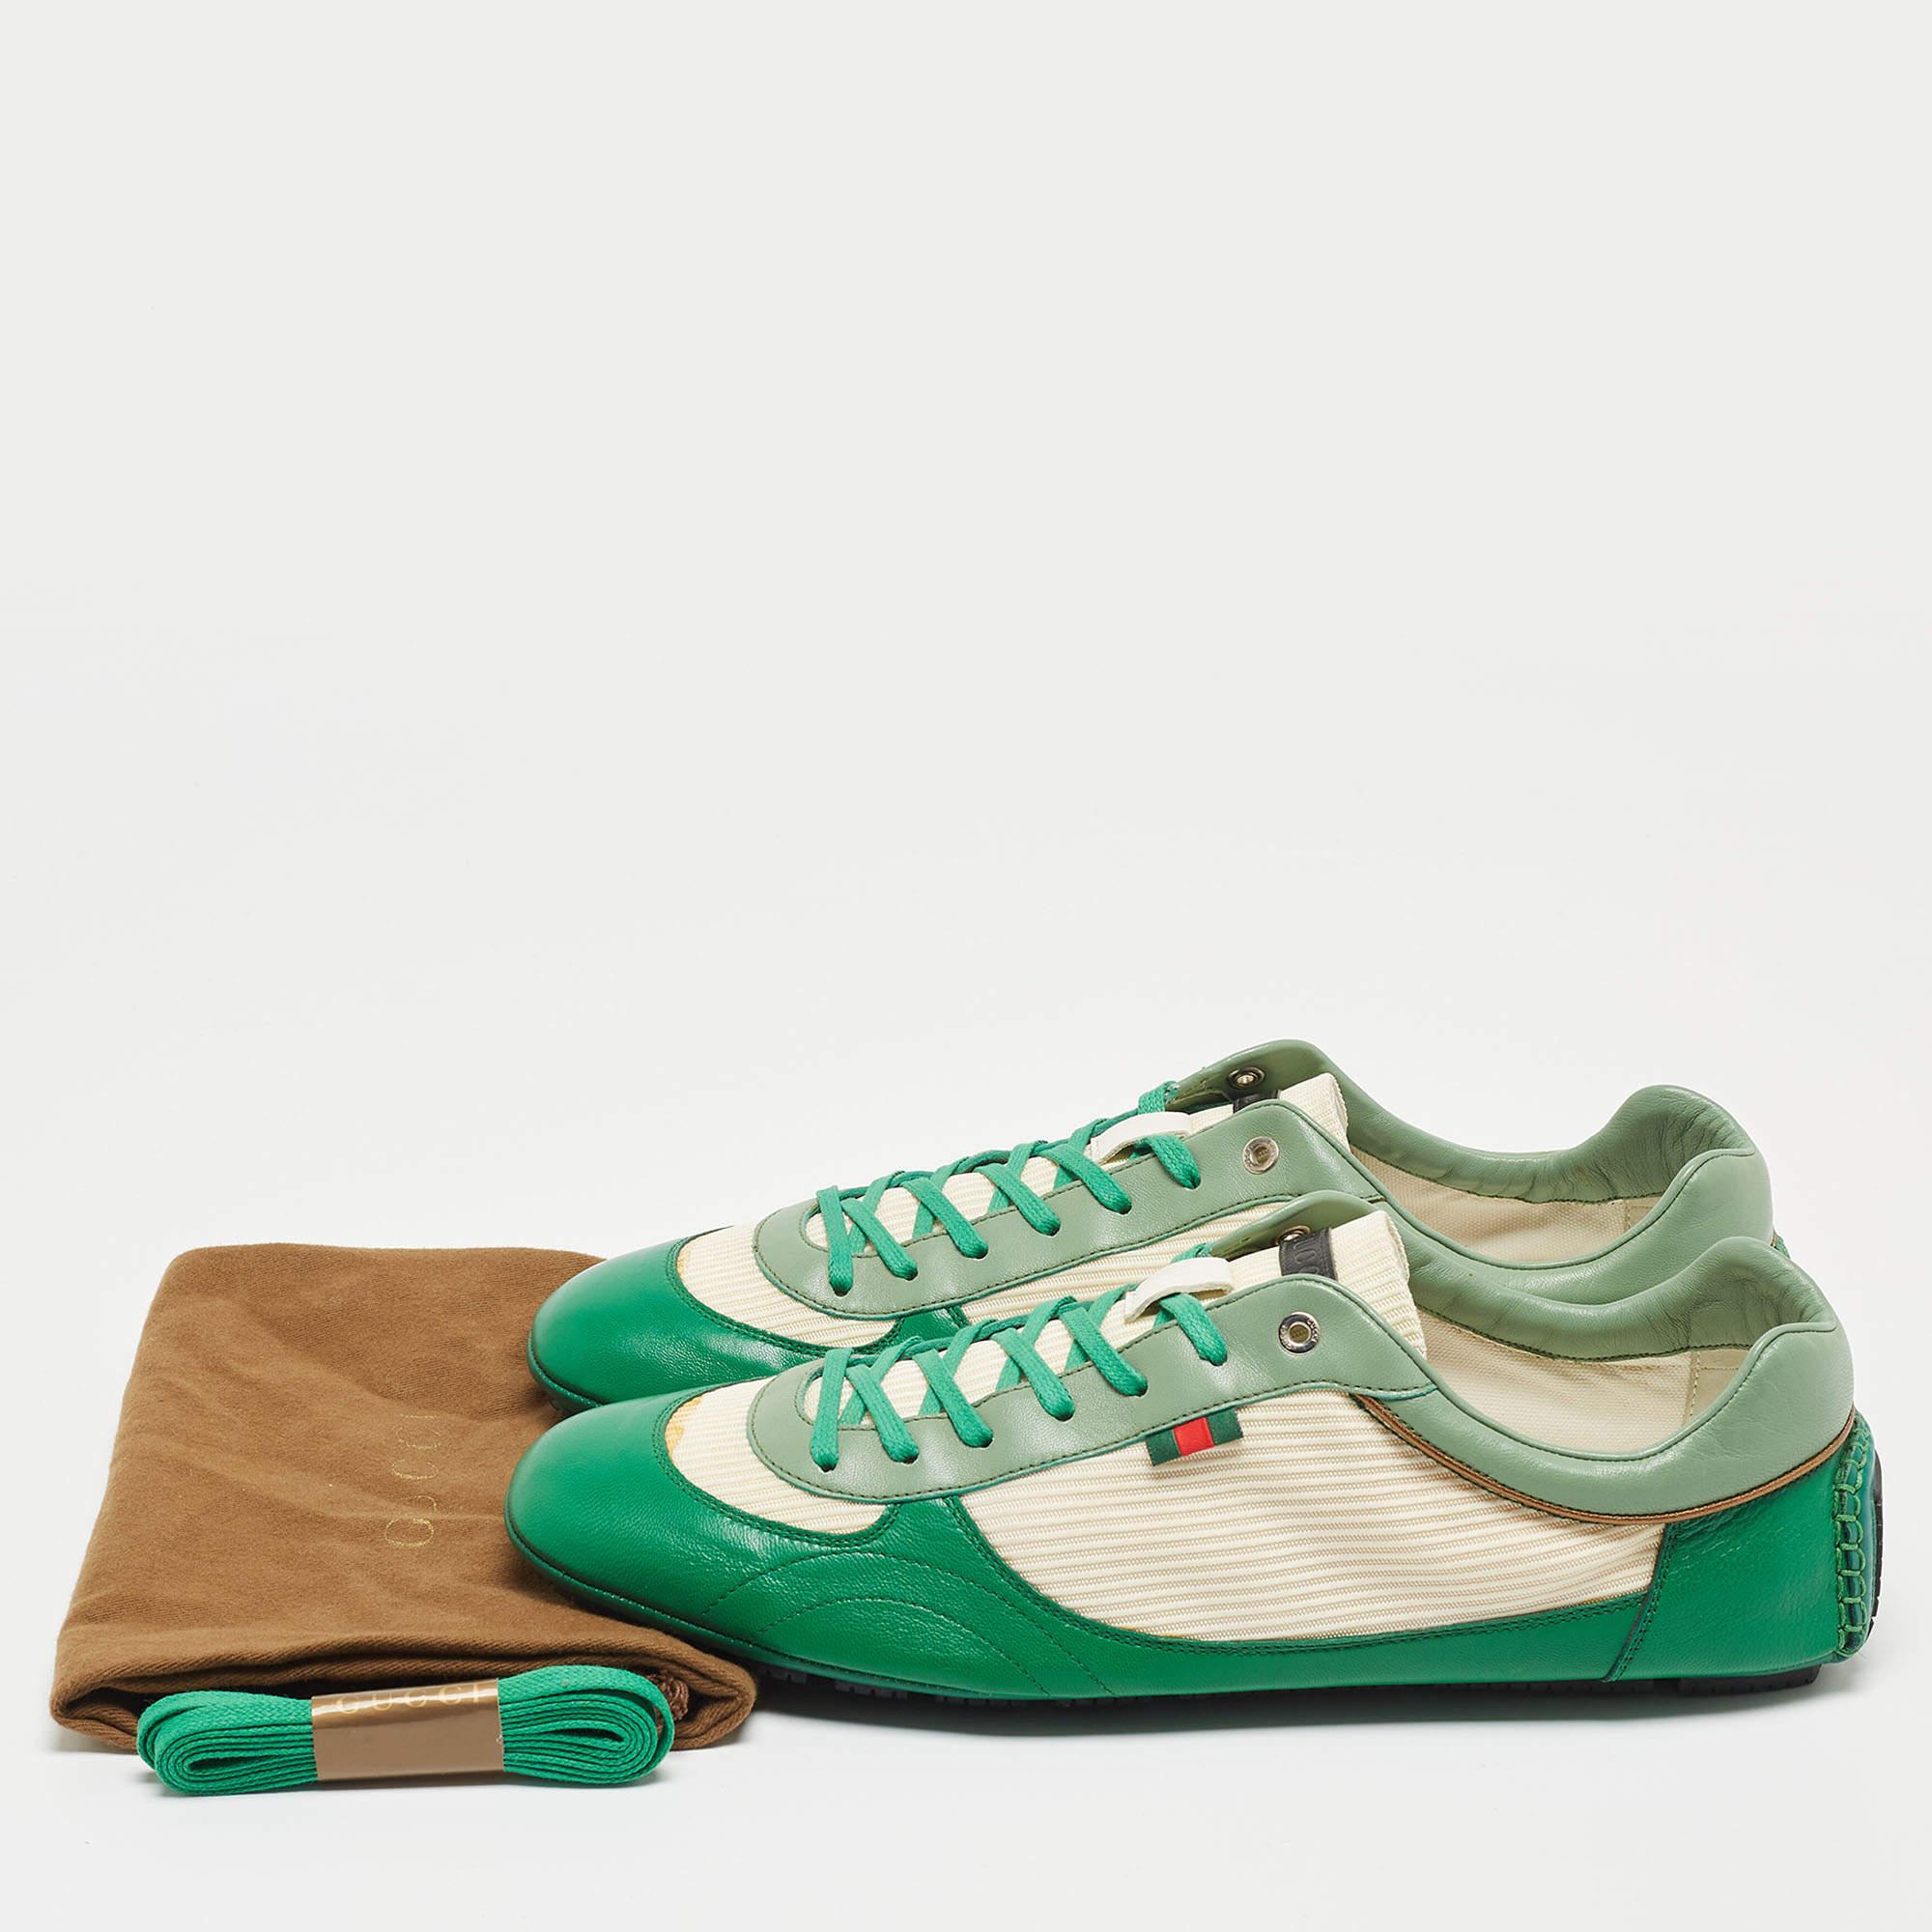 Gucci Green/White Leather and Fabric Low Top Sneakers Size 45.5 For Sale 6